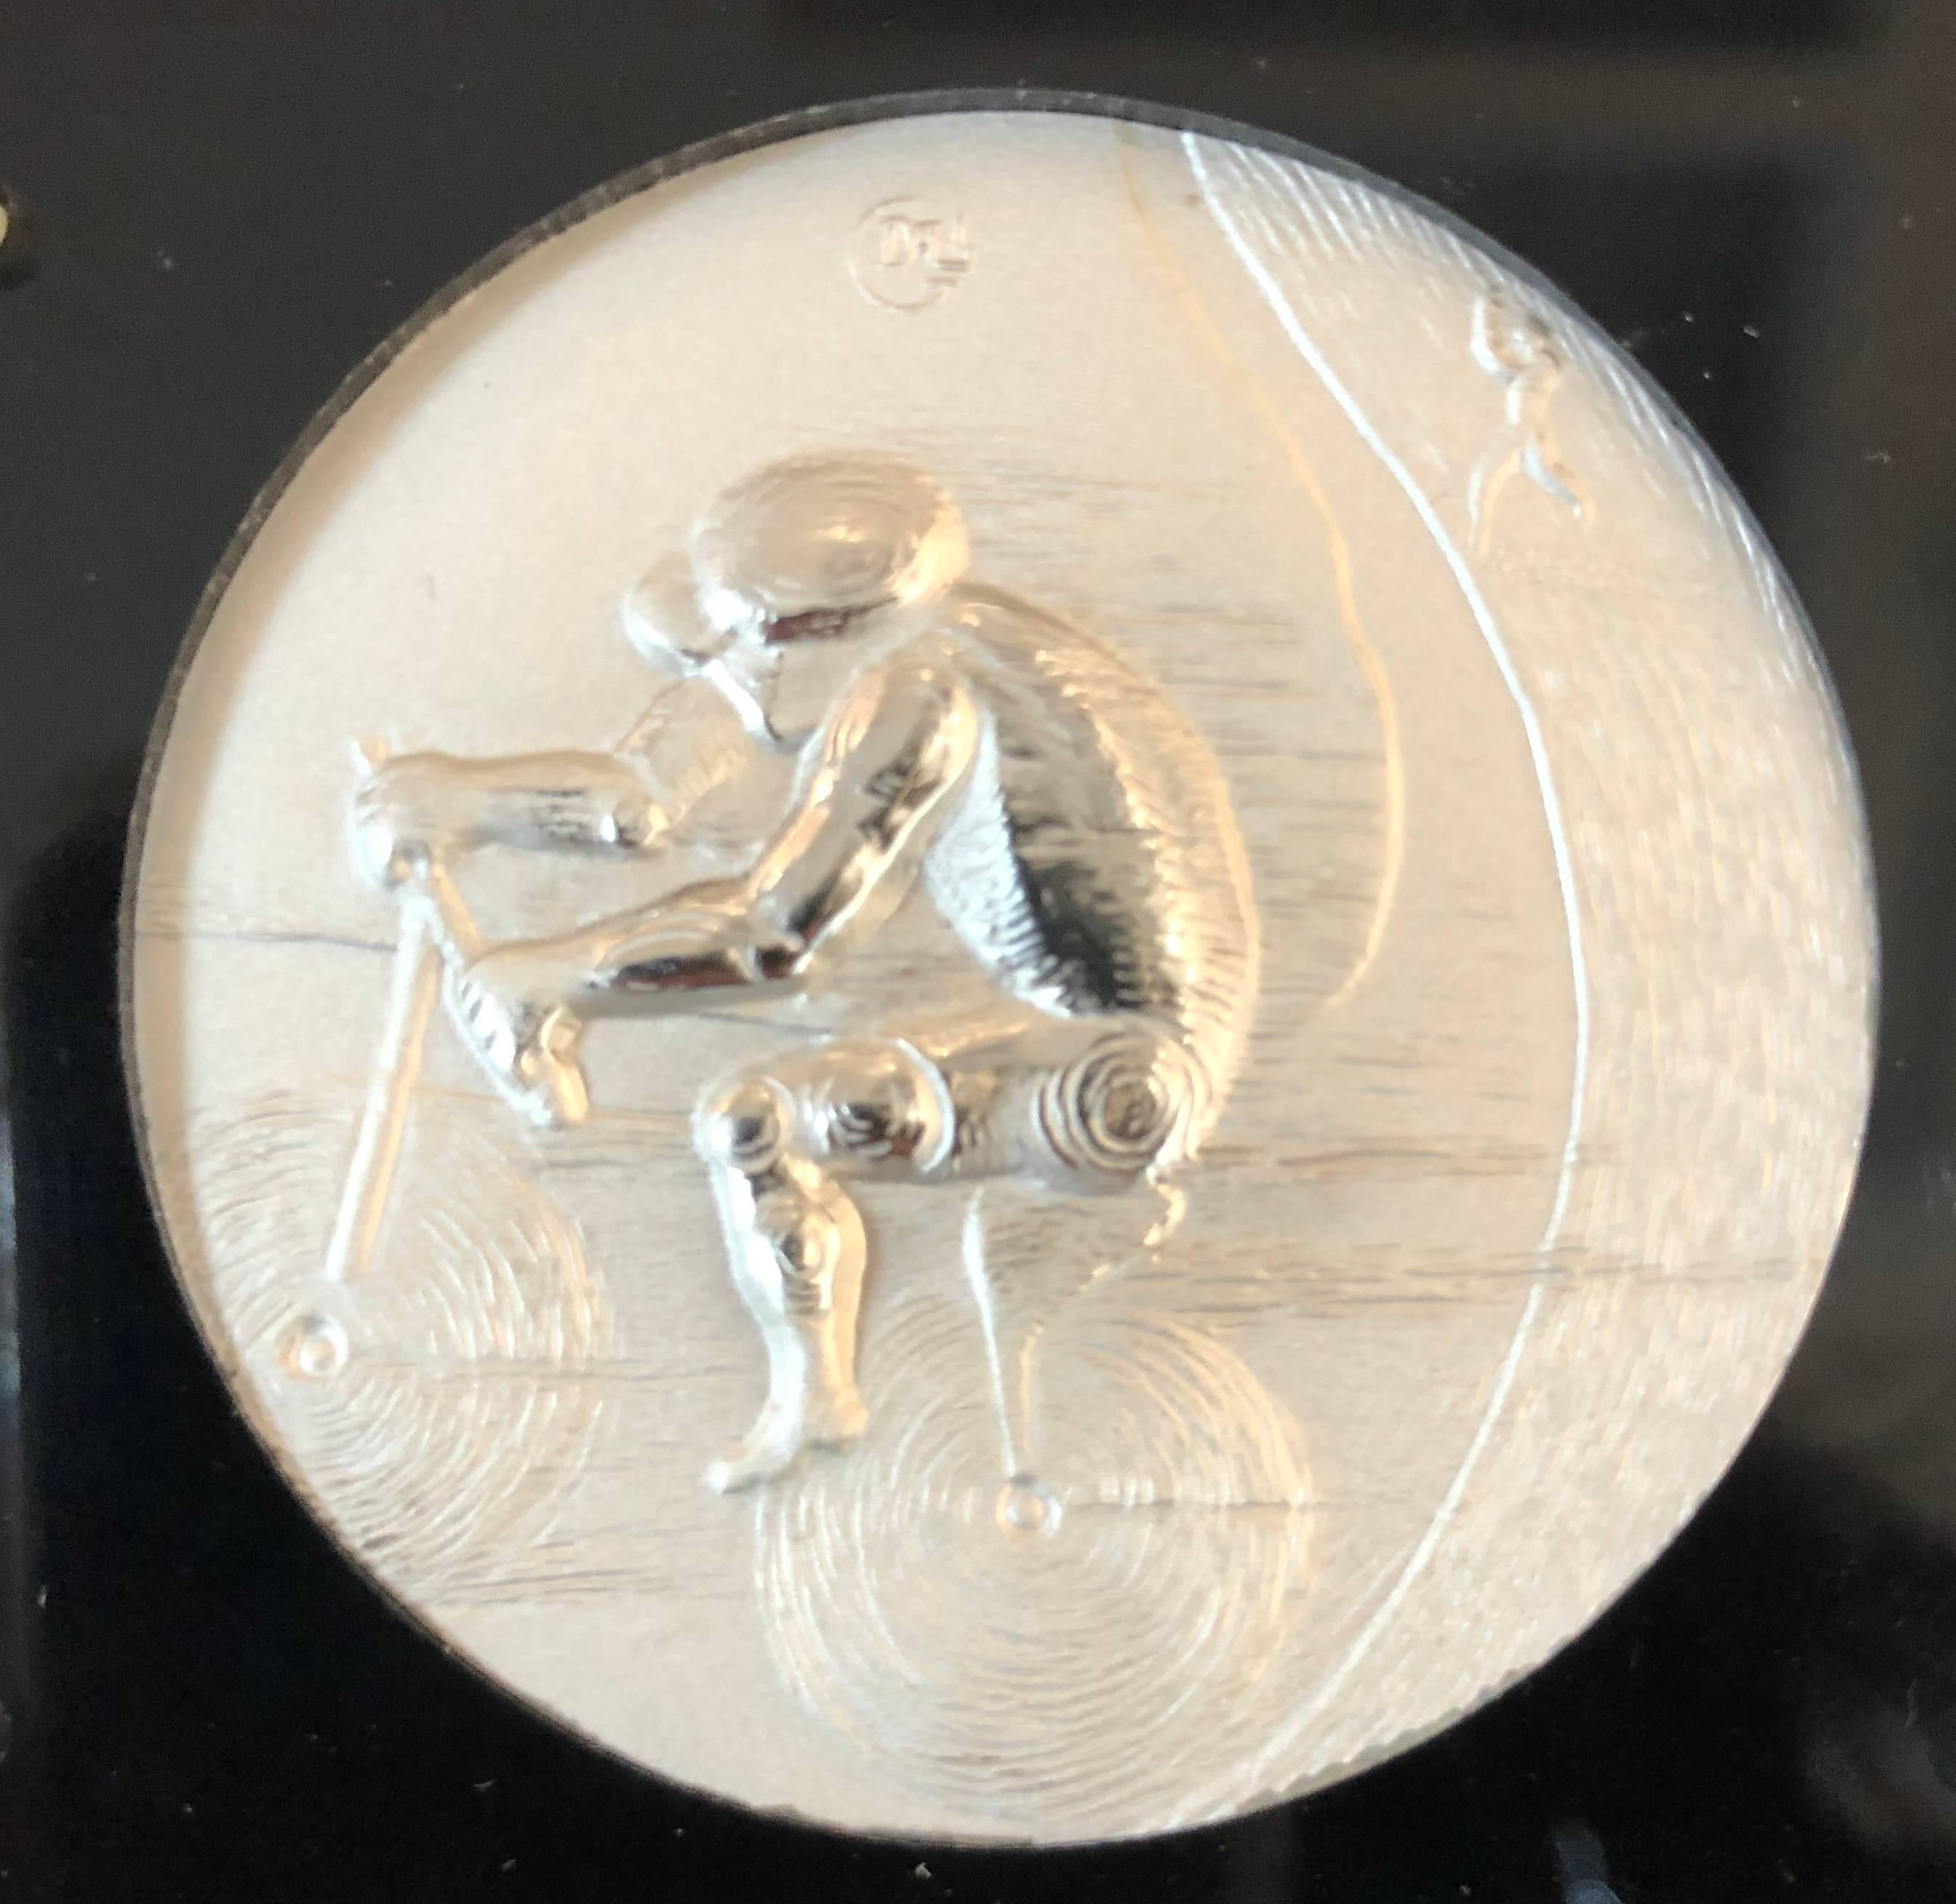 This complete set of 11 silver medallions was done by Salvador Dali for the 1984 Olympics in Los Angeles.  These medallions were made exclusively for Intercoin, West-Germany.  Dali requested that Intercoin mint these medallions in precious metals of